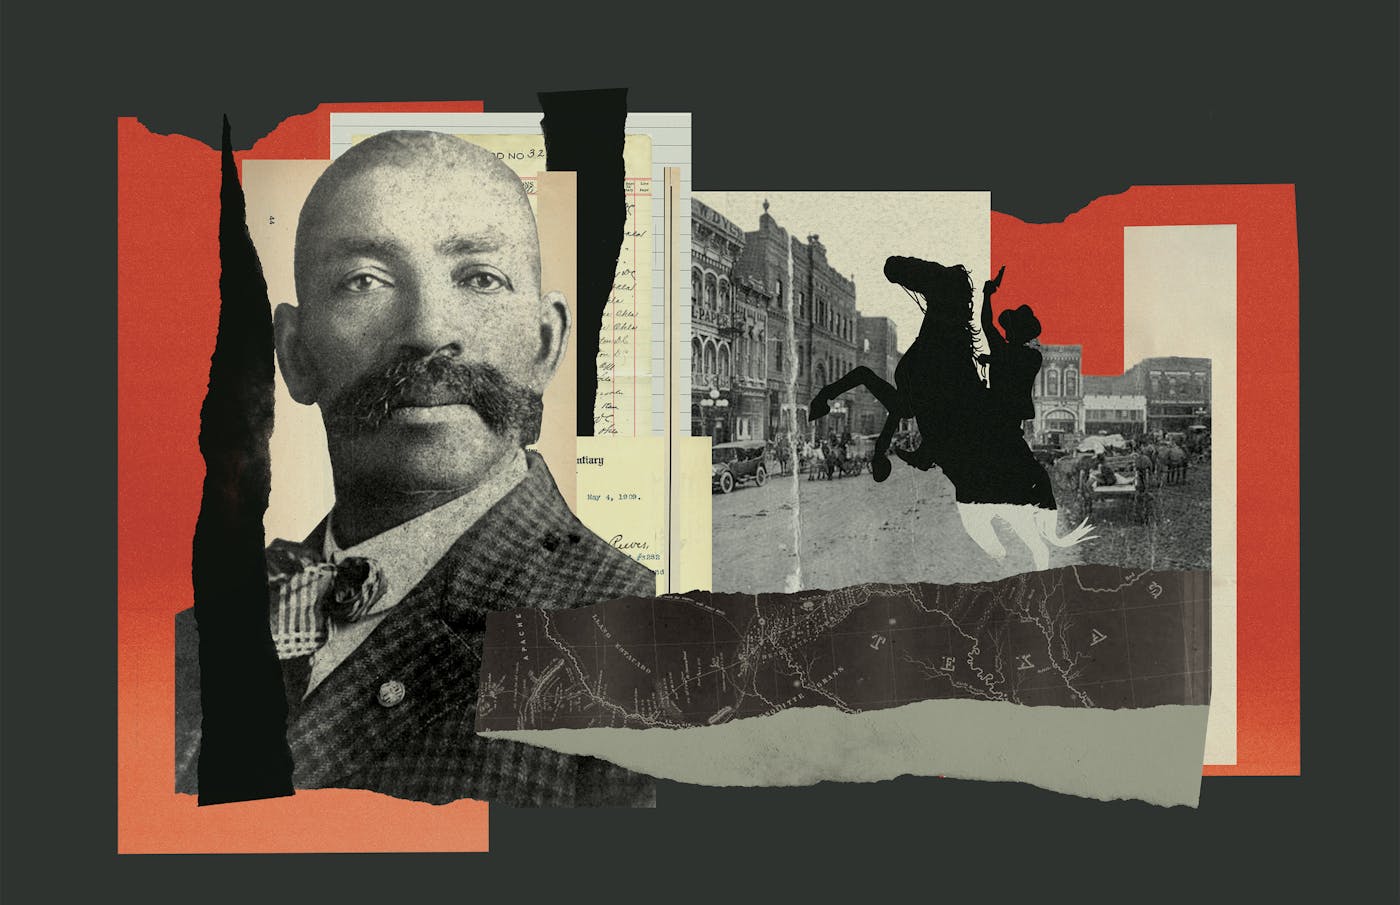 China Room Rep Xxx Vidio - Was the Lone Ranger Black? The Fight to Resurrect the Legacy of Bass Reeves  â€“ Texas Monthly